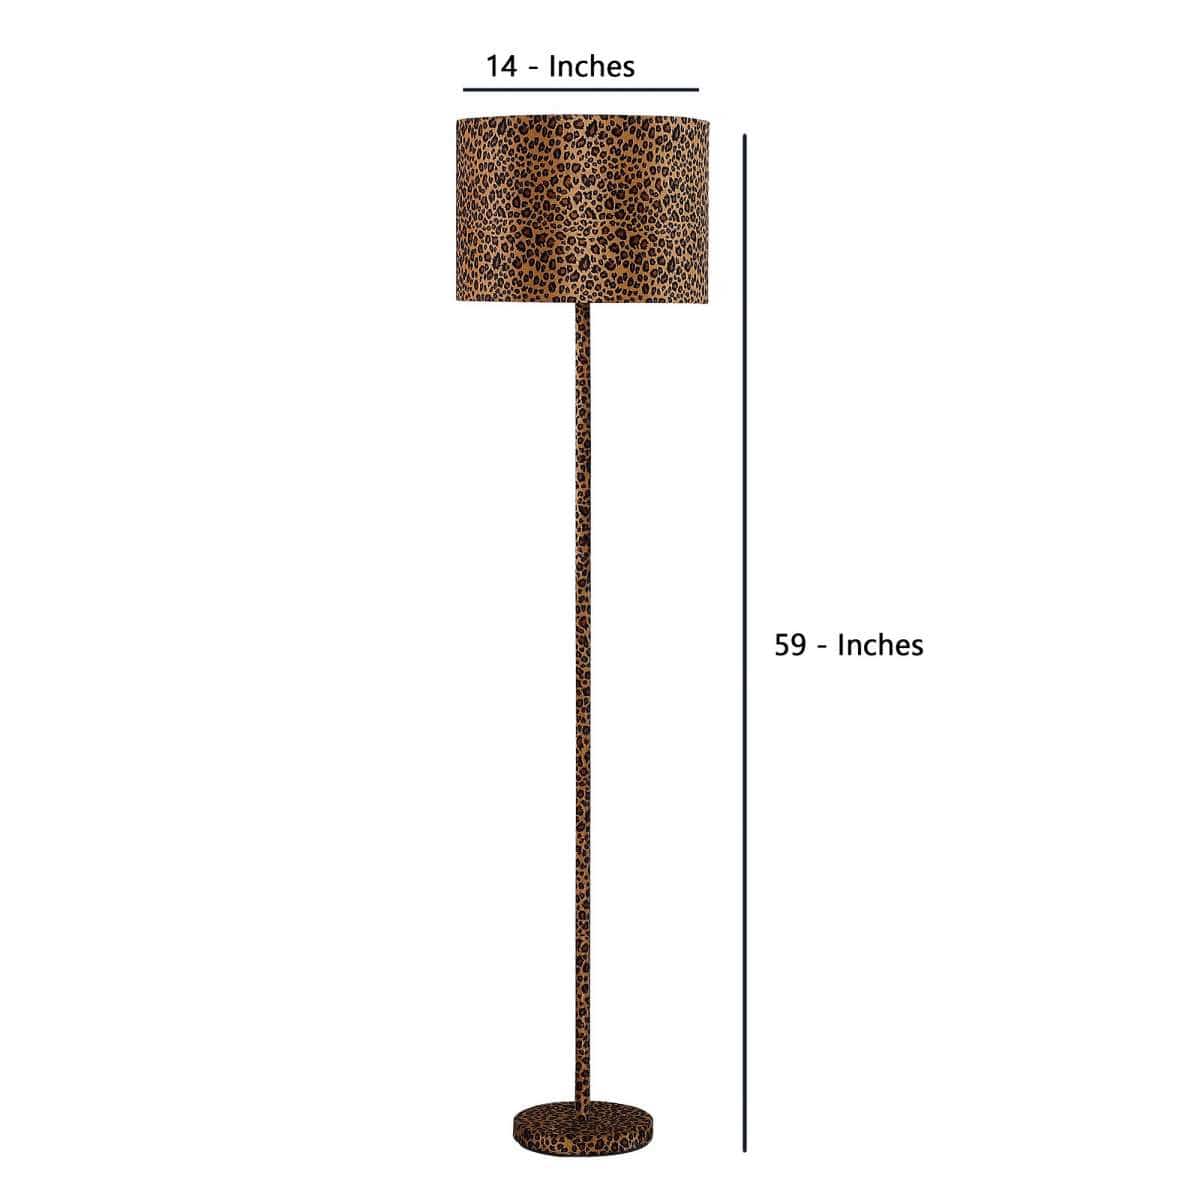 Benzara Fabric Wrapped Floor Lamp With Dotted Animal Print, Brown And Black By Benzara Floor Lamps BM233932